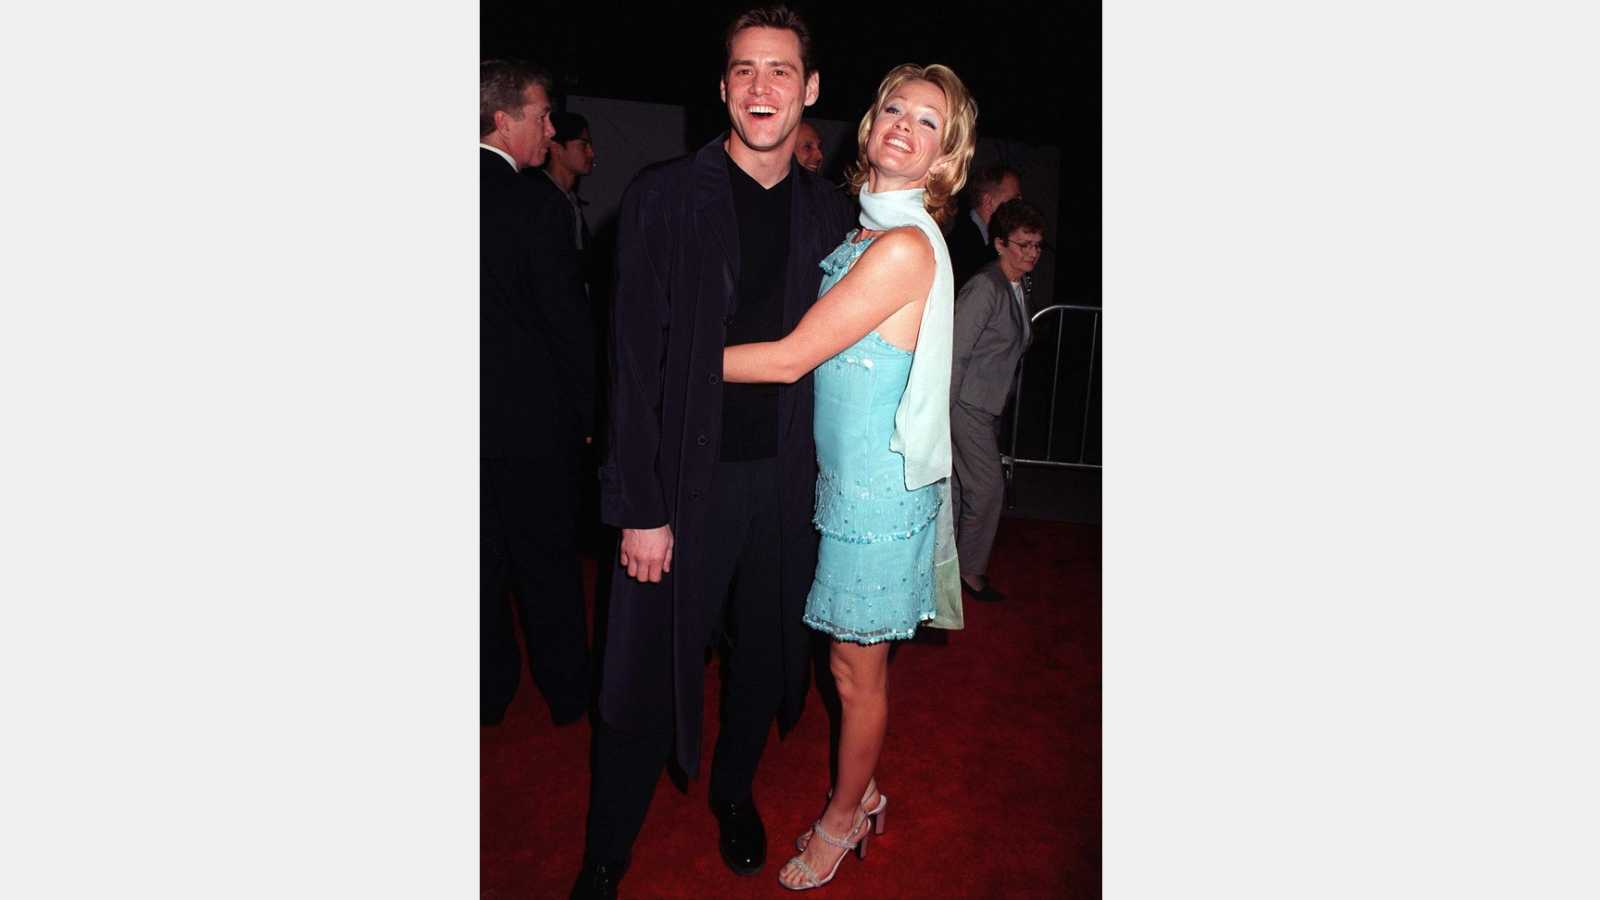 18MAR97: Actor JIM CARREY & actress wife LAUREN HOLLY at the premiere of his new movie, "Liar Liar" at Universal Studios. Pix: PAUL SMITH